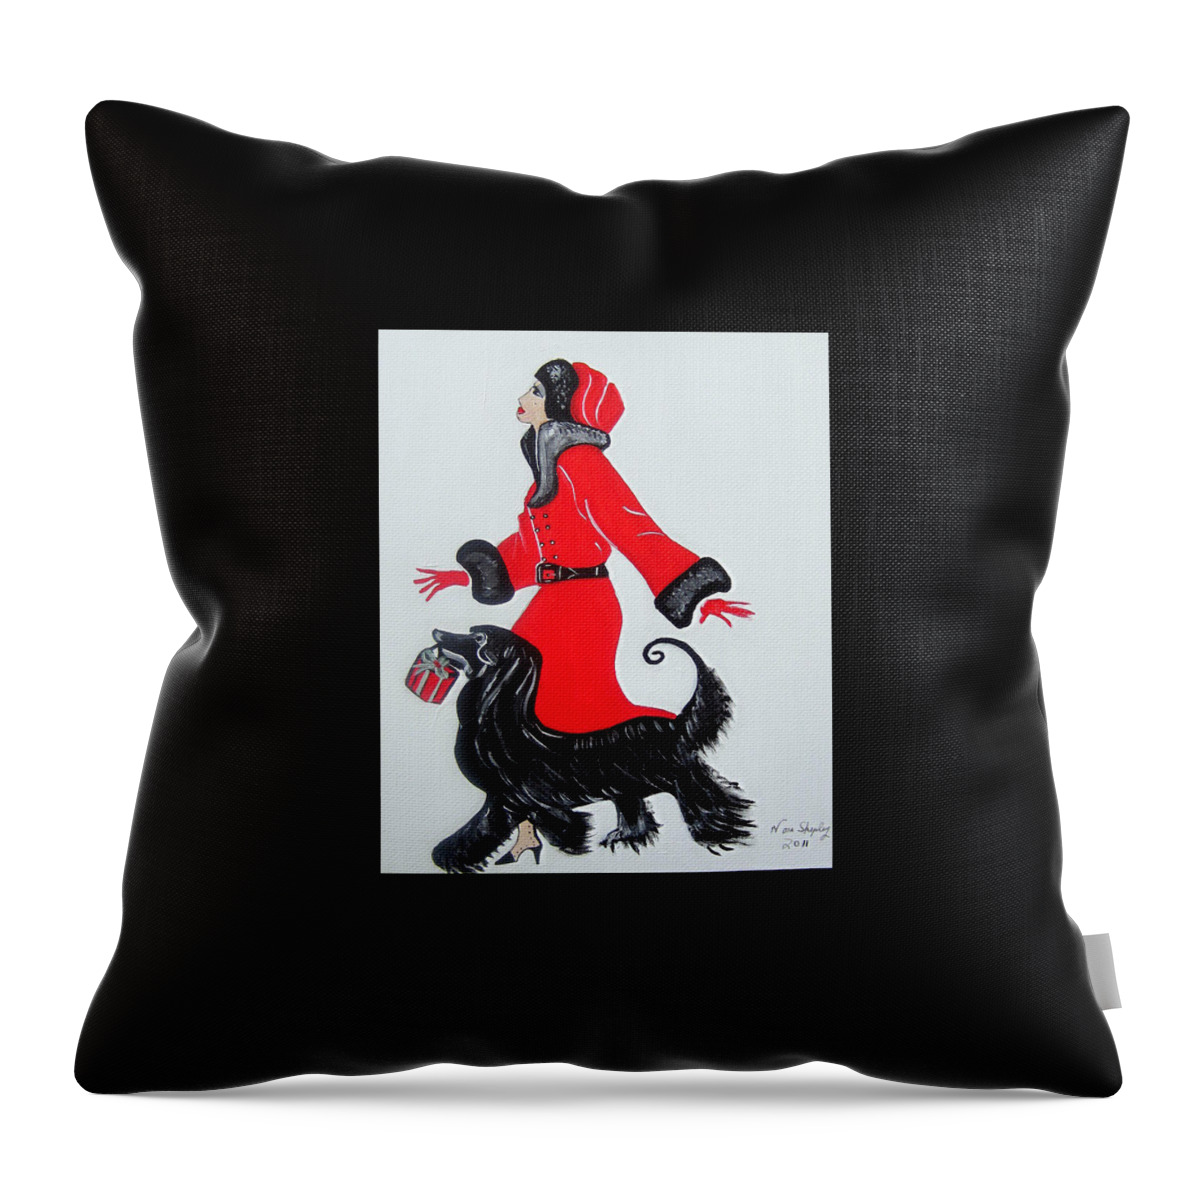 Art Deco  Girl With Red Coat Throw Pillow featuring the painting Art Deco Girl With Red Coat by Nora Shepley